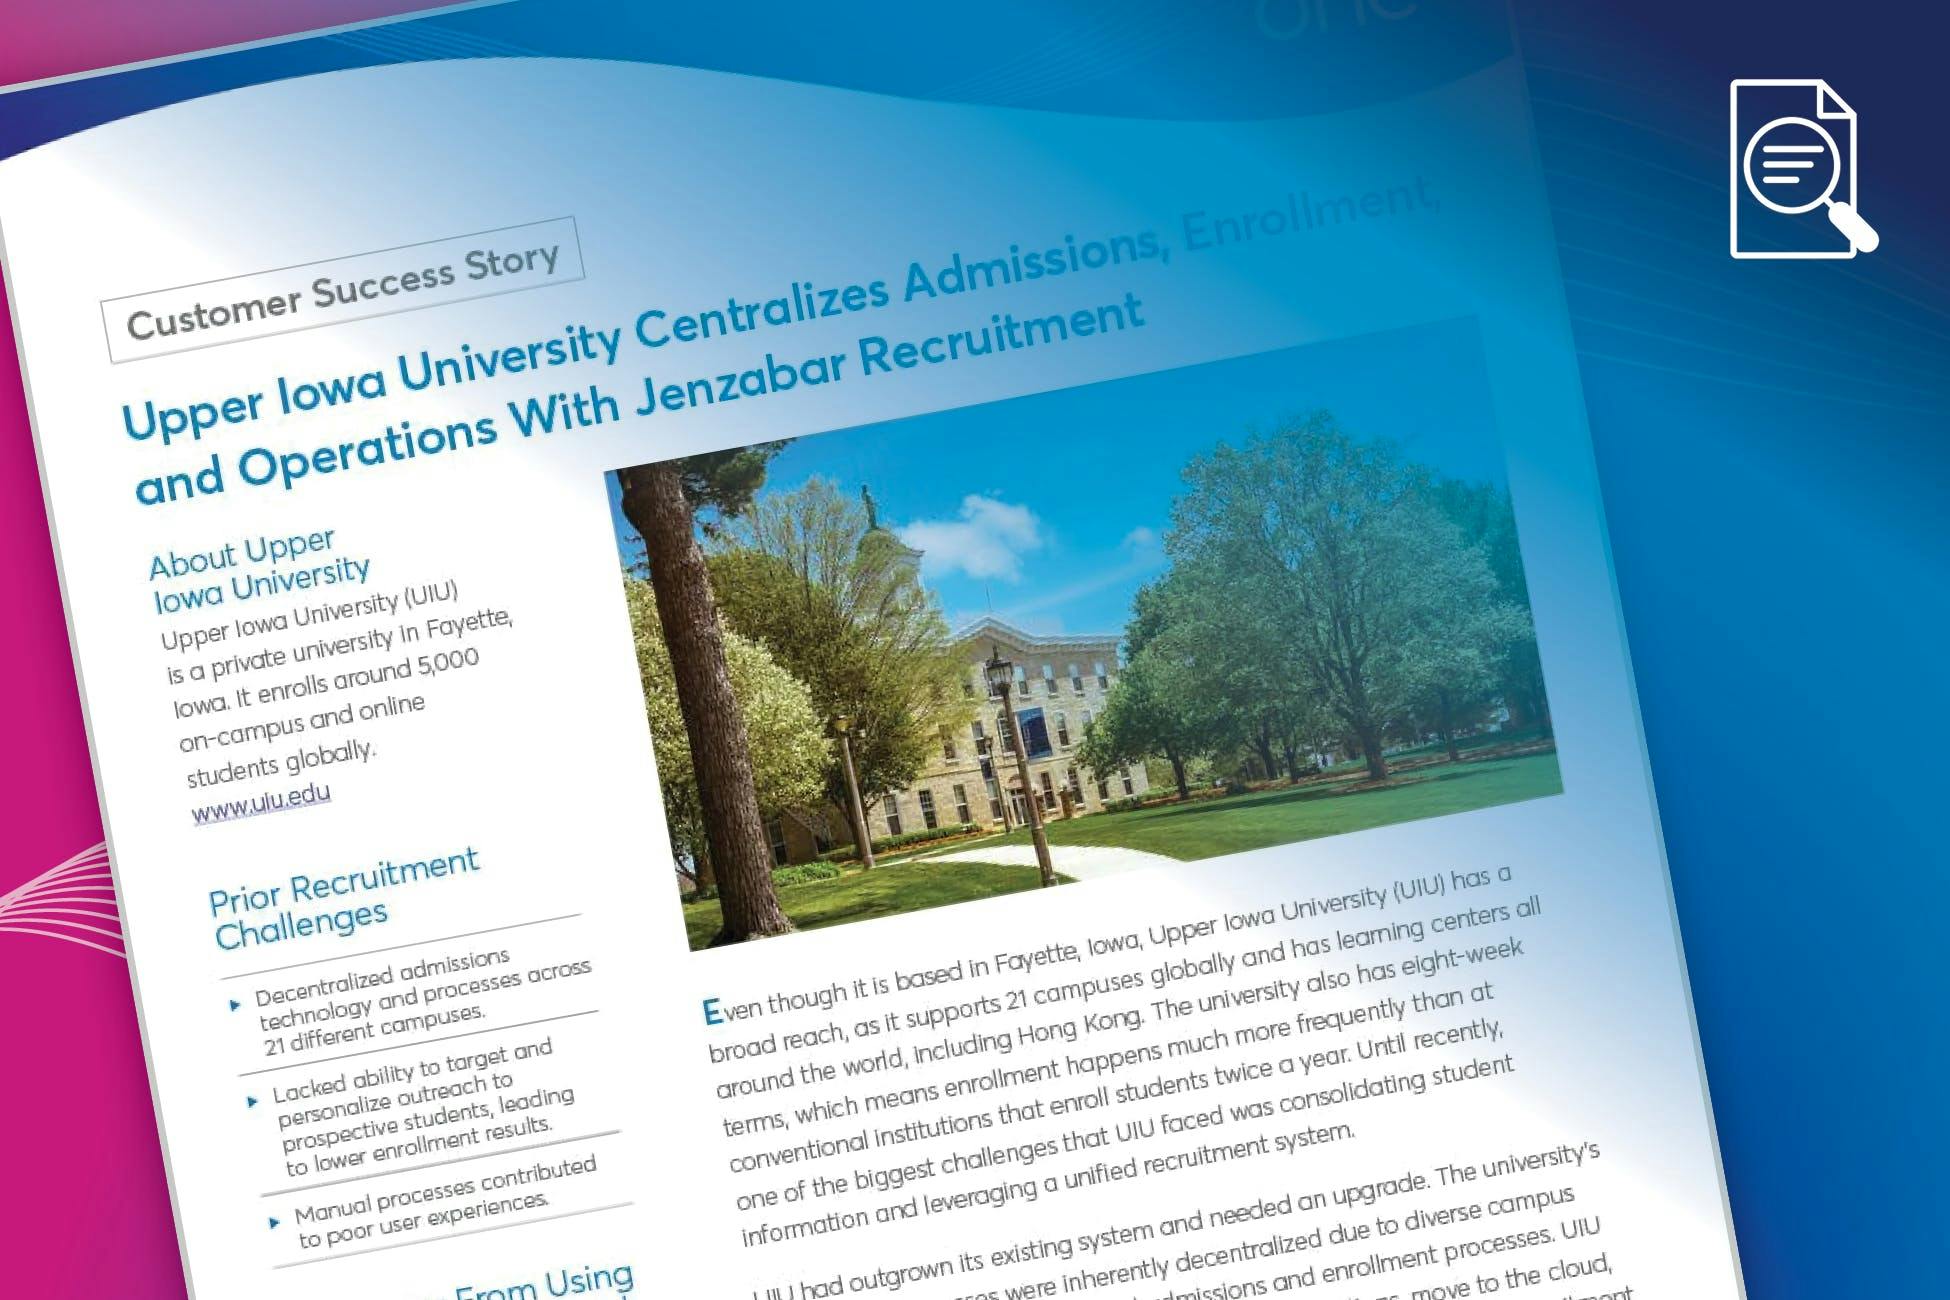 Case Study: Upper Iowa University Centralizes Admissions, Enrollment, and Operations With Jenzabar Recruitment